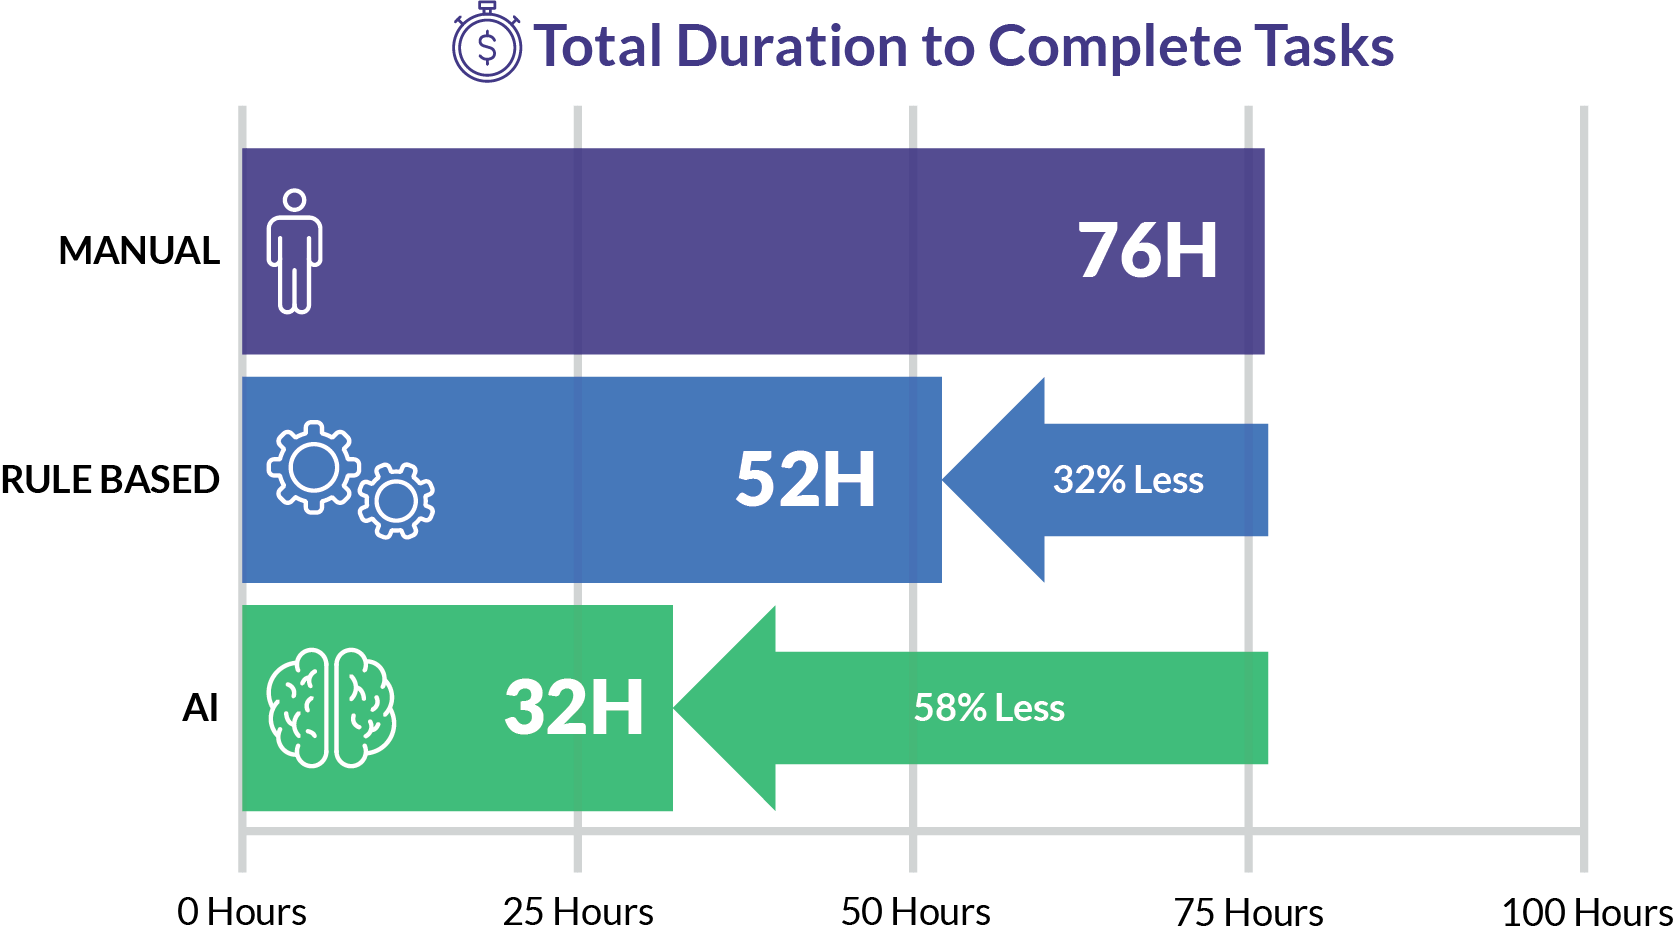 Bar graph showing the improvement in total duration to complete tasks between “manual’ at 76 hours and “AI” at 32 hours representing a 58% improvement.